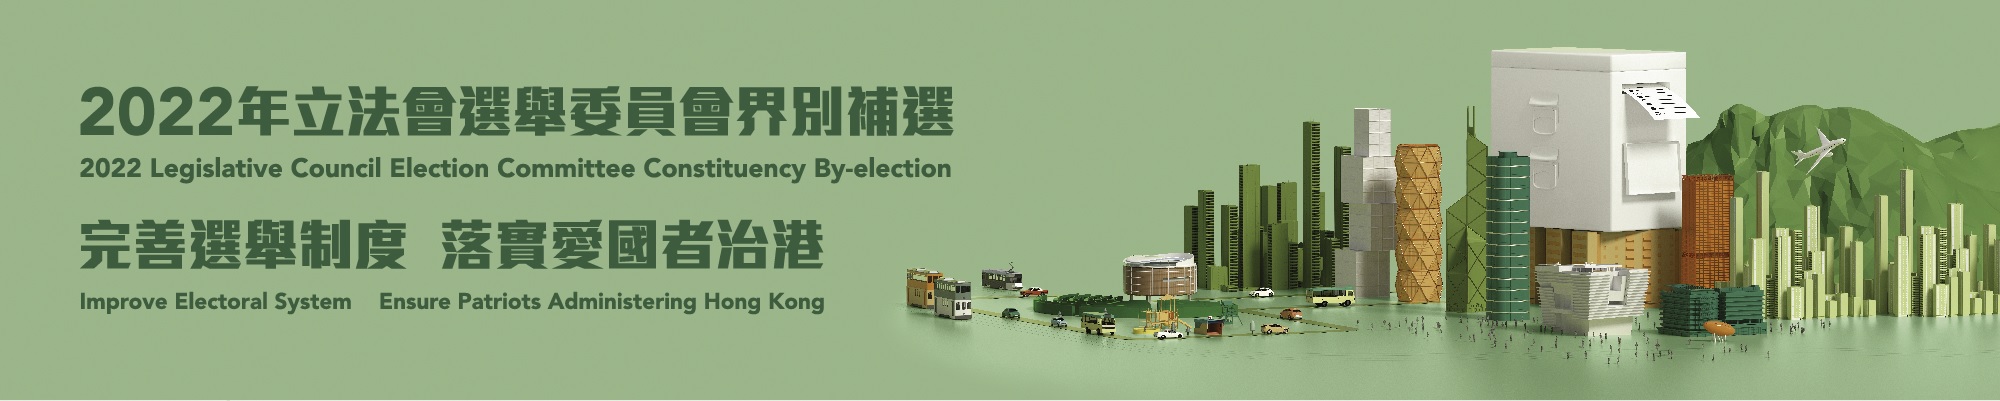 2022 Legislative Council Election Committee Constituency By-election - Home